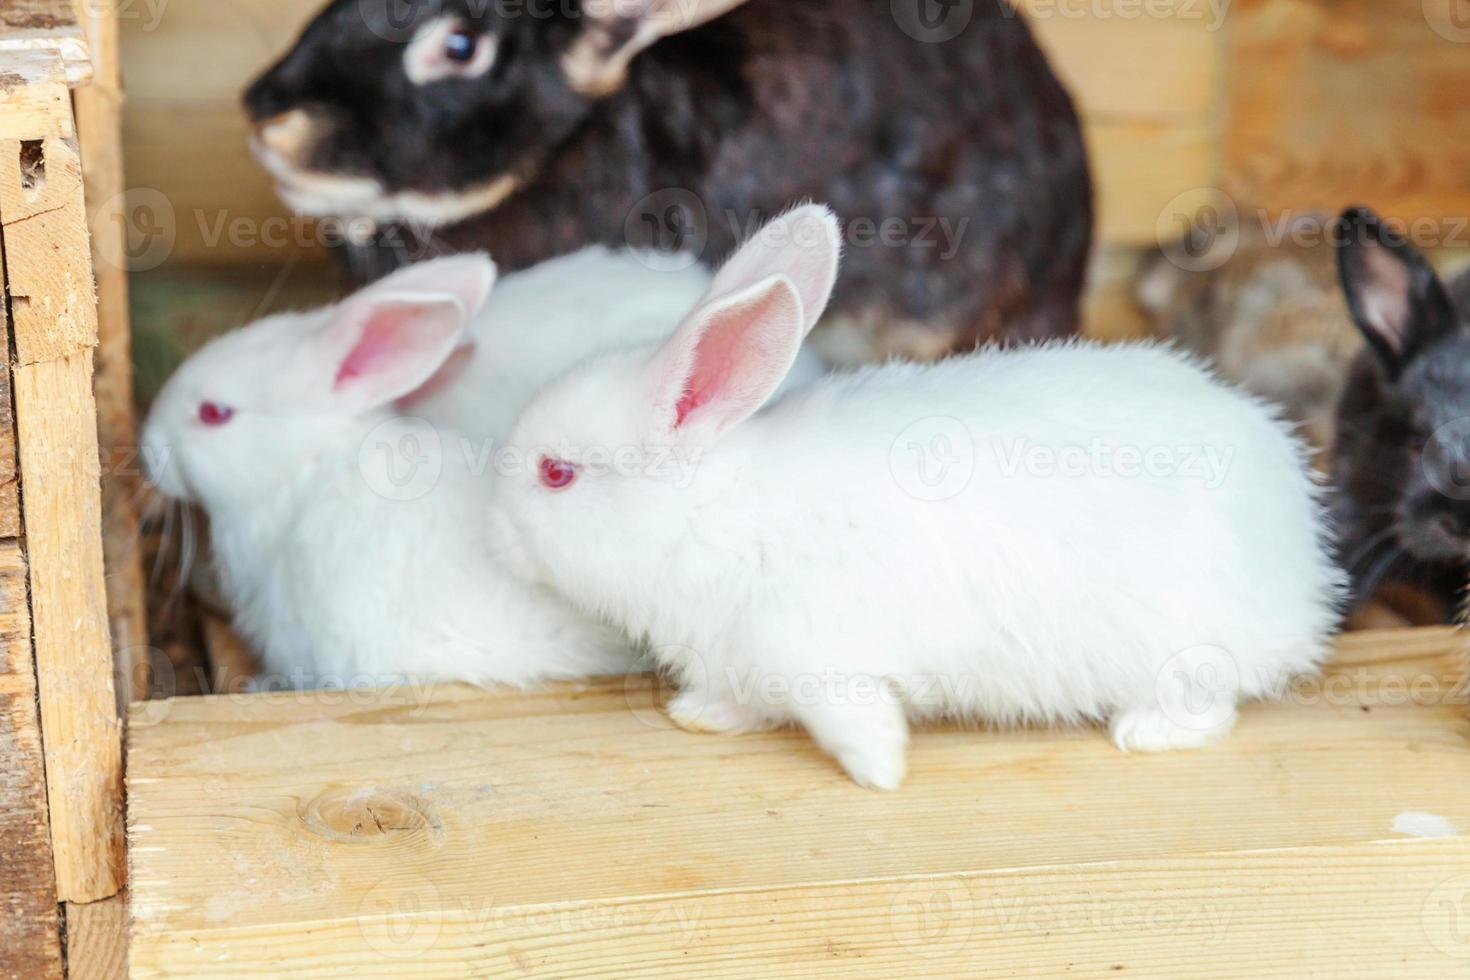 Many different small feeding rabbits on animal farm in rabbit-hutch, barn ranch background. Bunny in hutch on natural eco farm. Modern animal livestock and ecological farming concept. photo